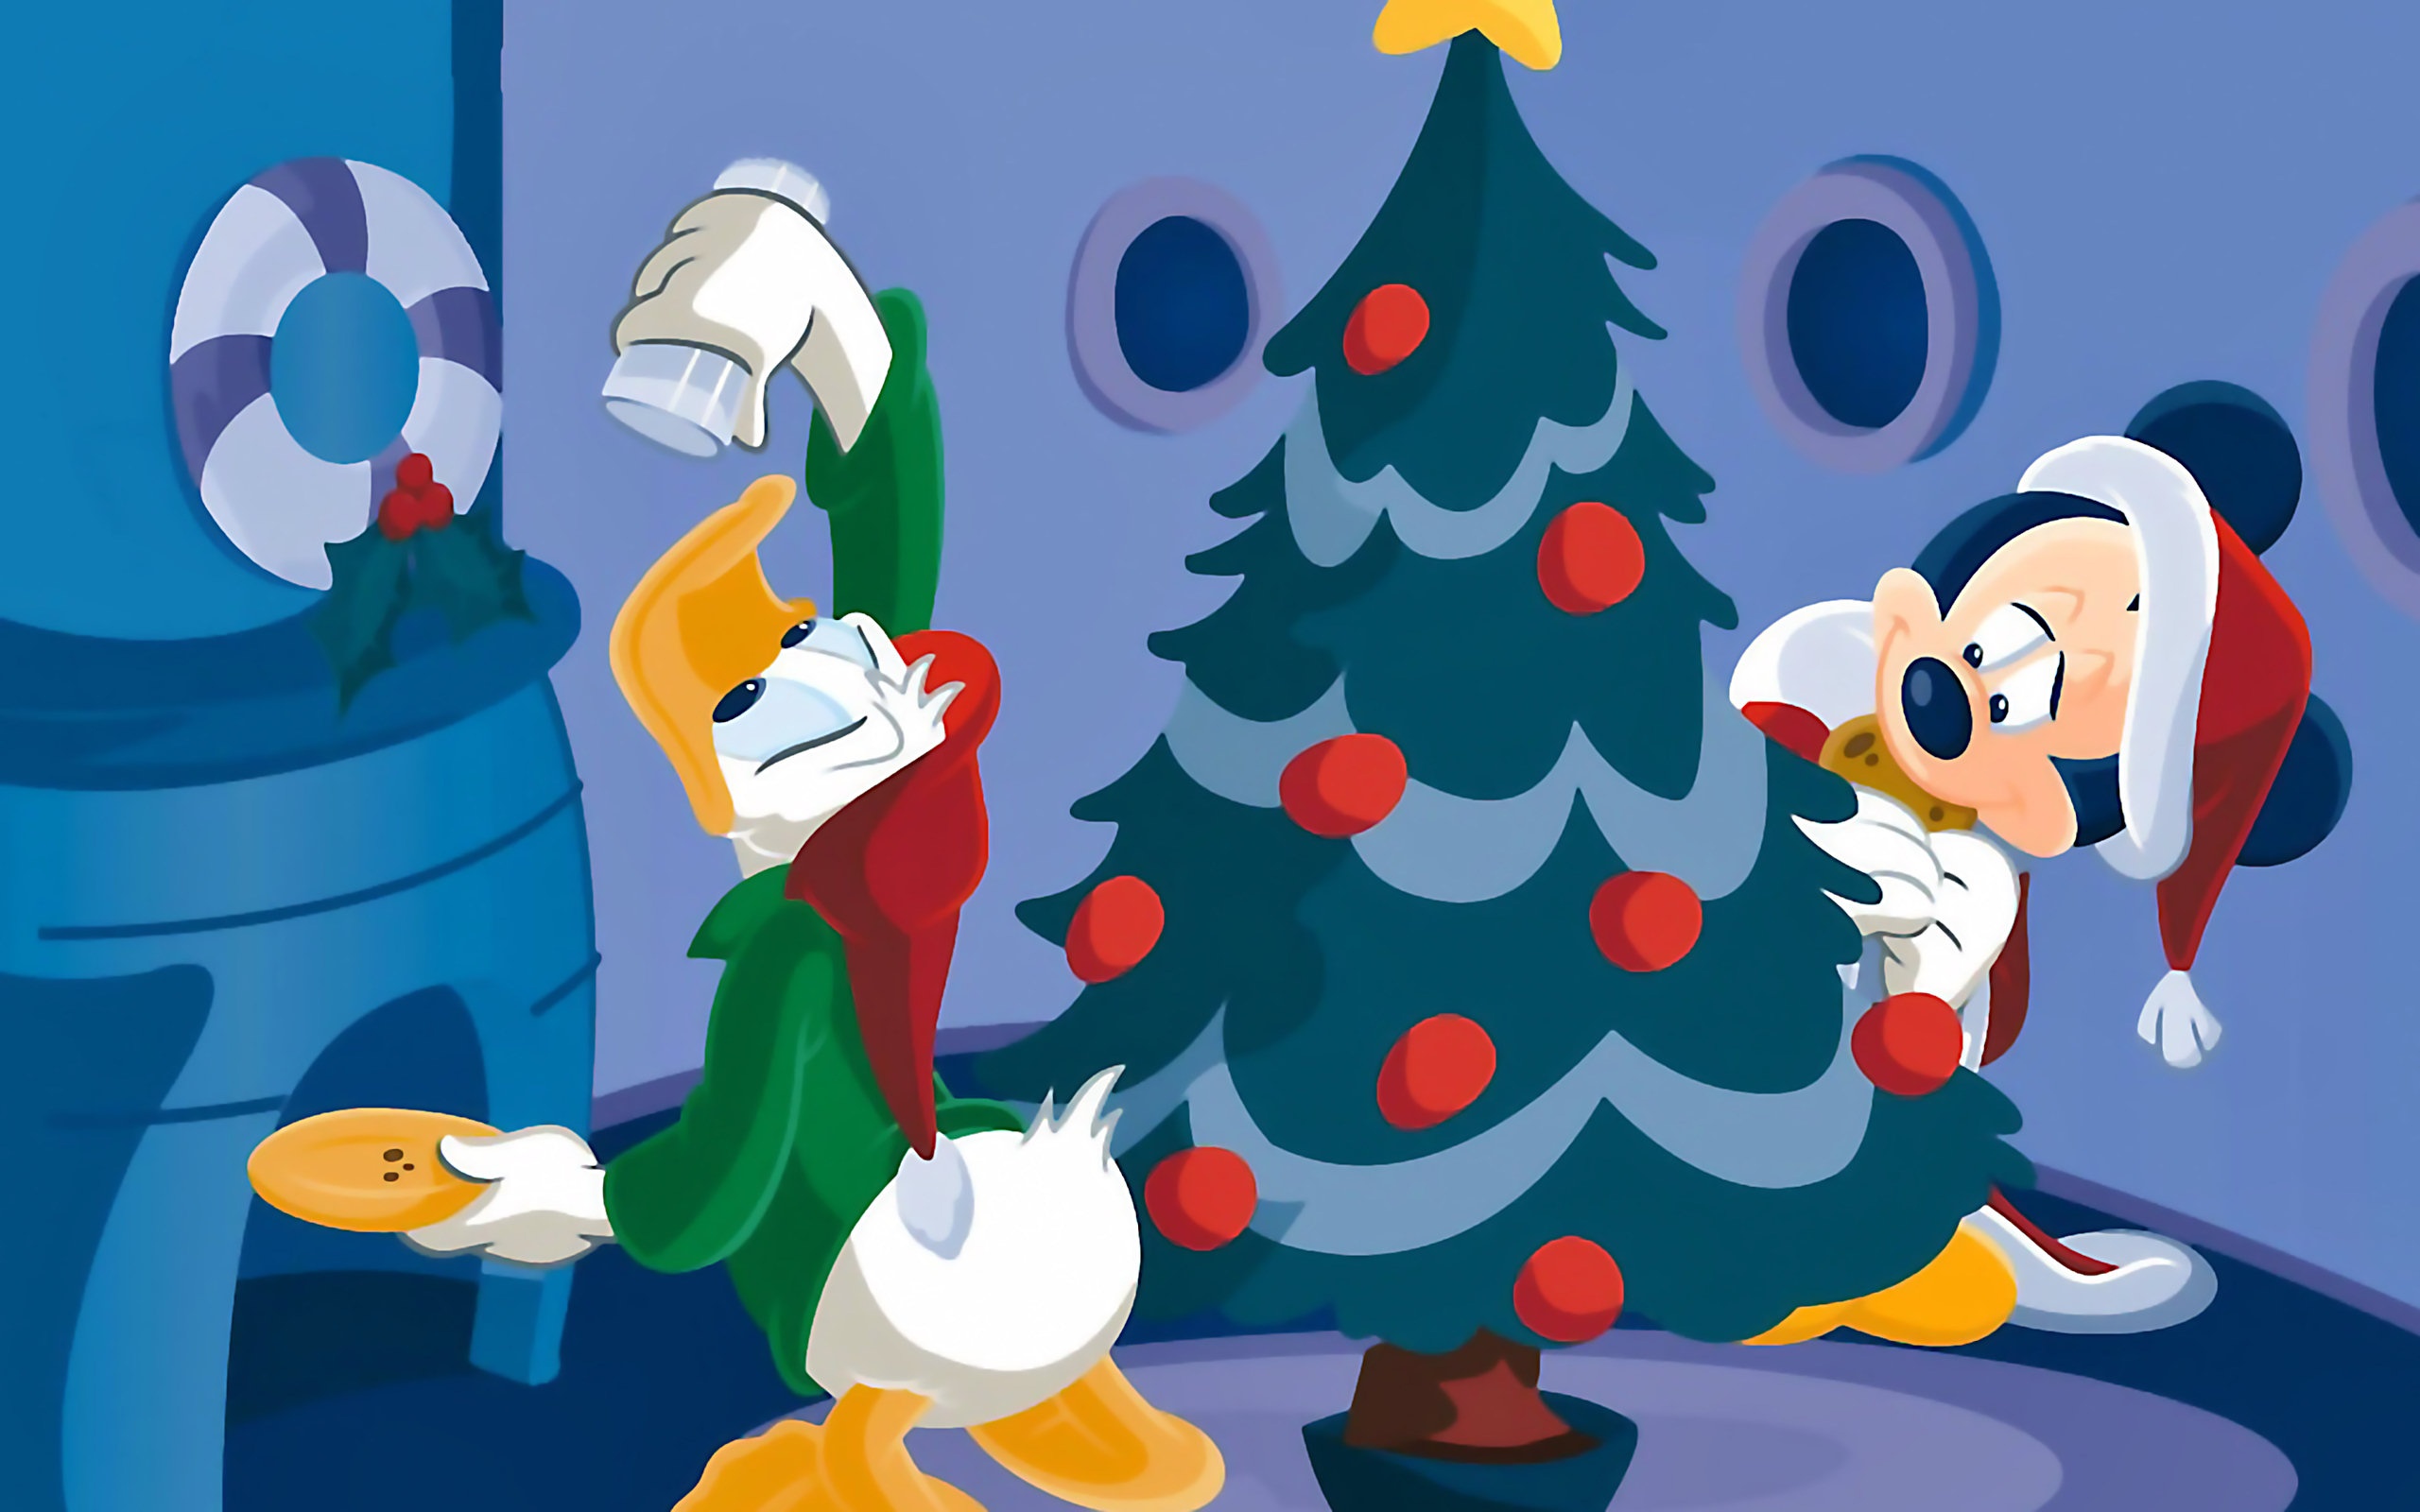 Disney Characters Decorating A Tree Christmas Wallpaper - Disney Cartoon Christmas Tree - HD Wallpaper 